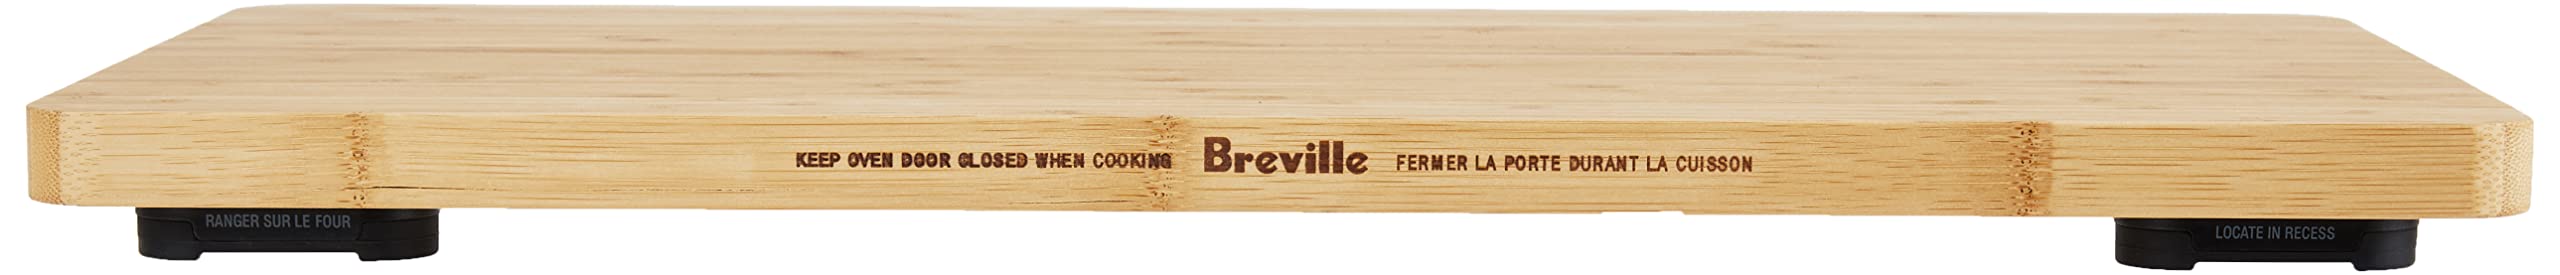 Breville BOV900ACB Bamboo Cutting Board, Brown Large